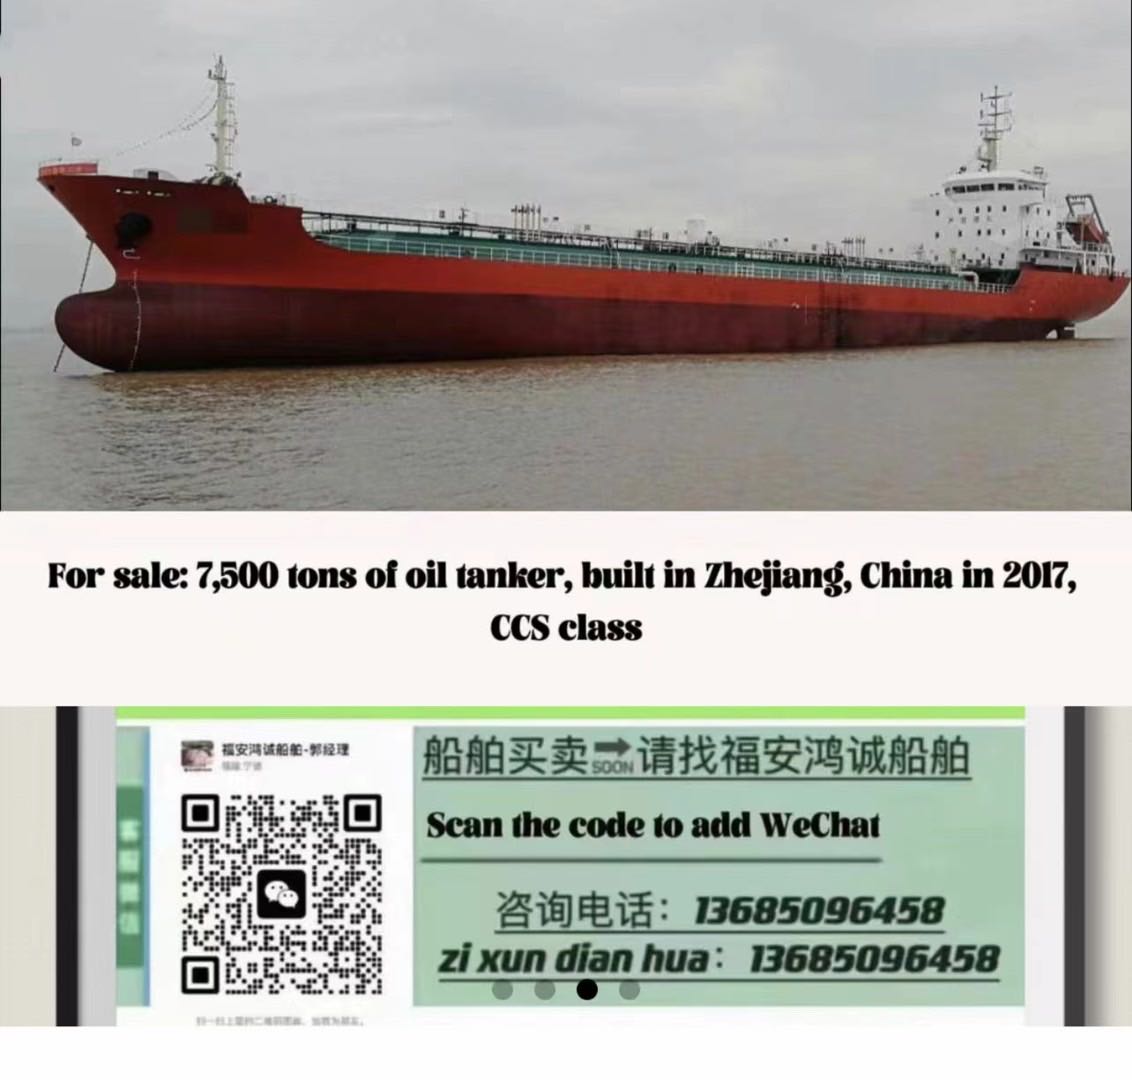 For sale: 7,500 tons of oil tanker, built in Zhejiang, China in 2017, CCS class